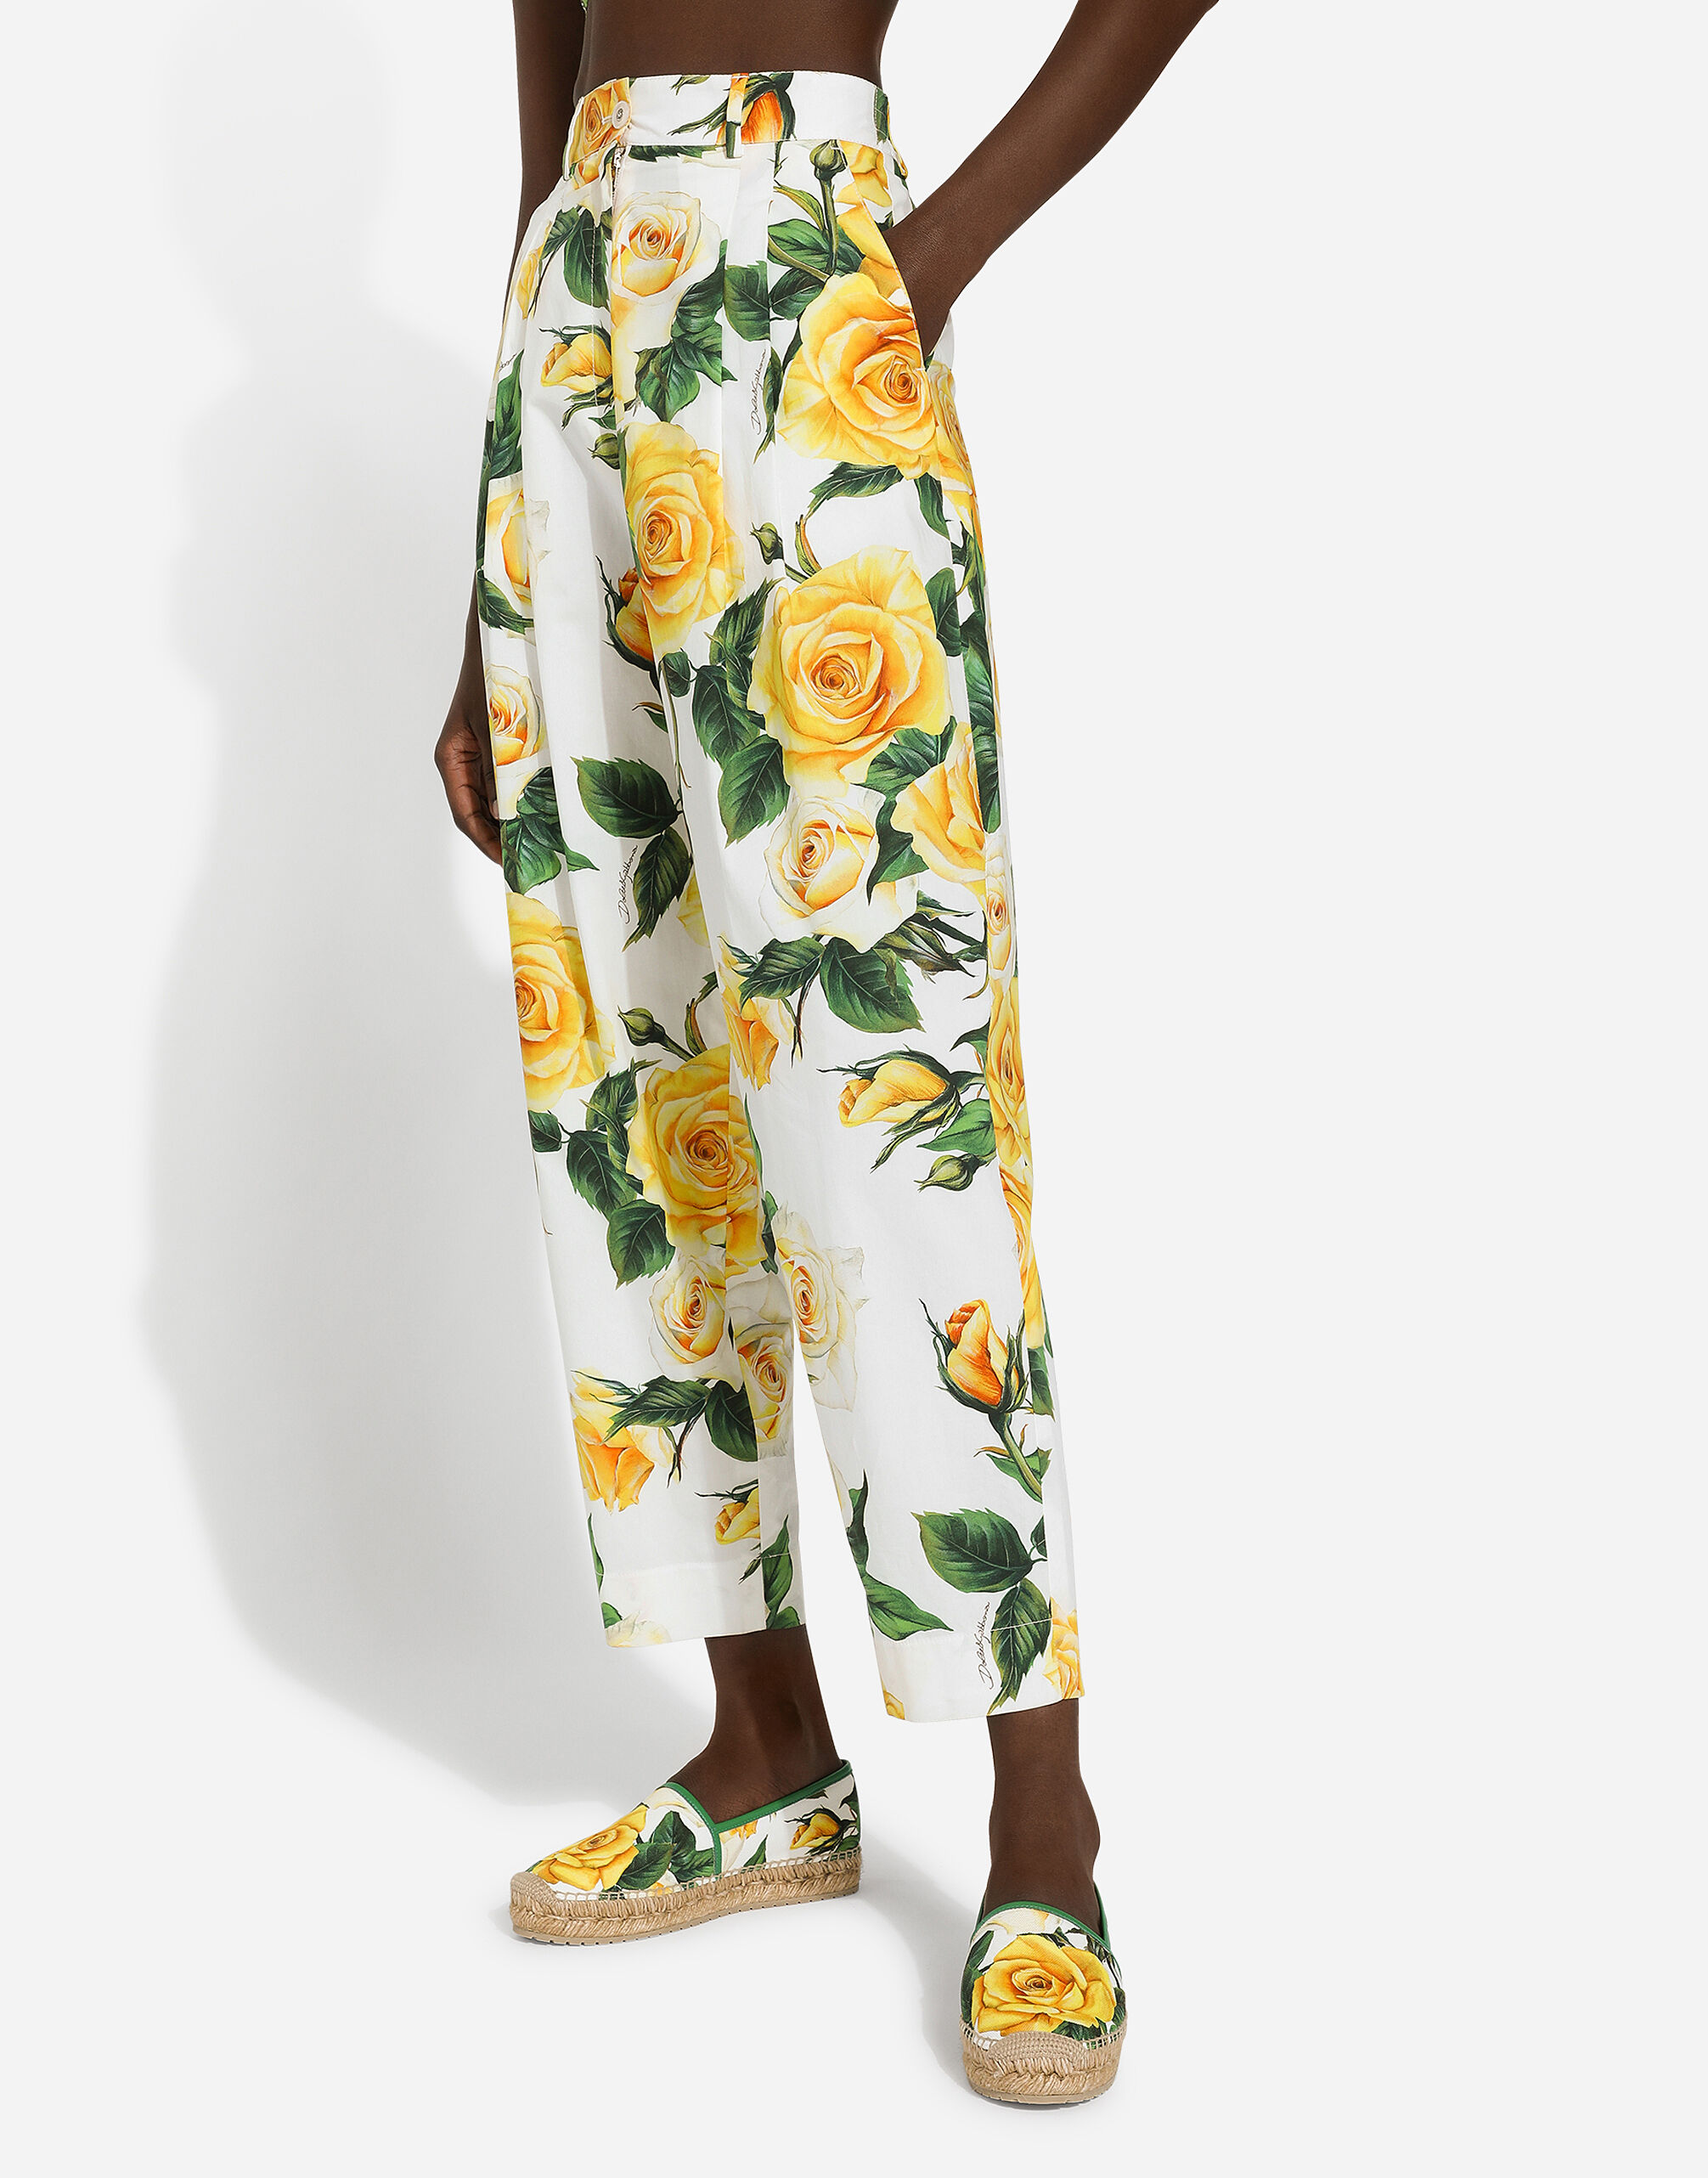 High-waisted cotton pants with yellow rose print